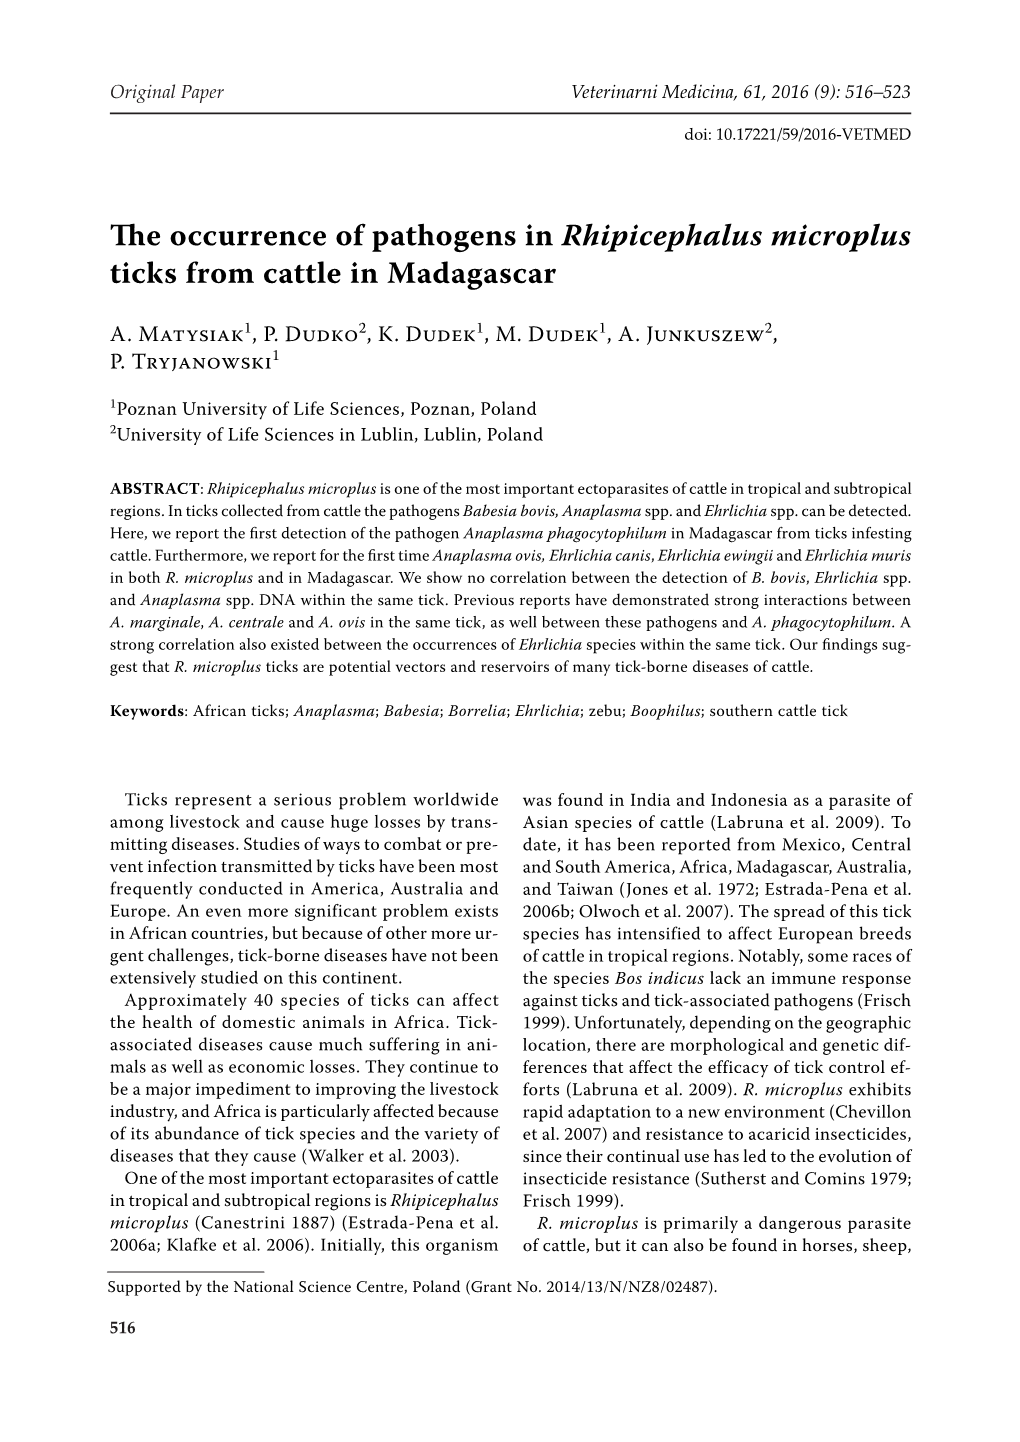 The Occurrence of Pathogens in Rhipicephalus Microplus Ticks from Cattle in Madagascar